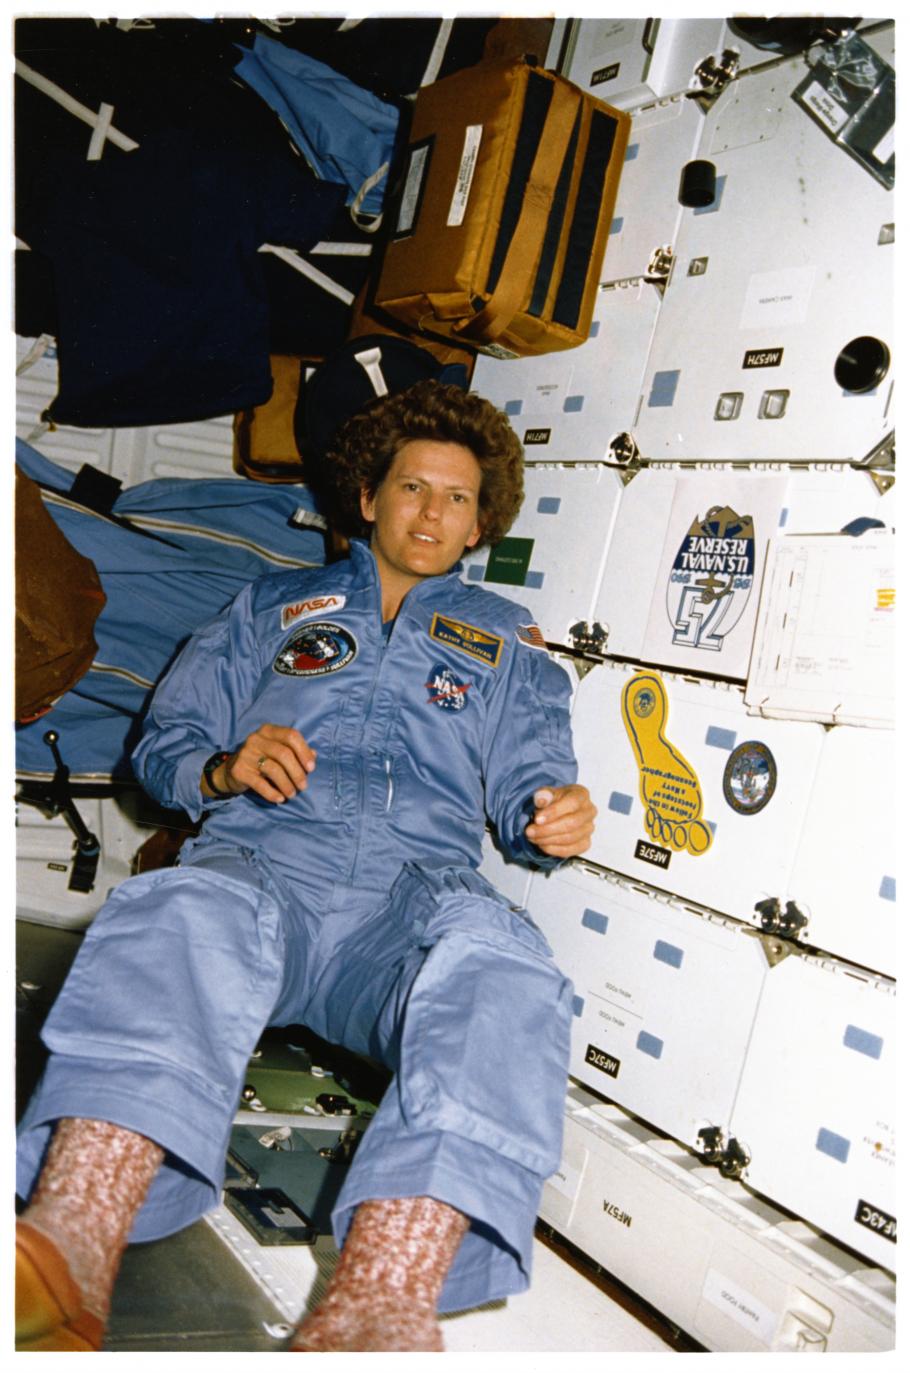 Woman in a light blue NASA flight suit floats weightlessly in front of the white lockered walls of the Space Shuttle.